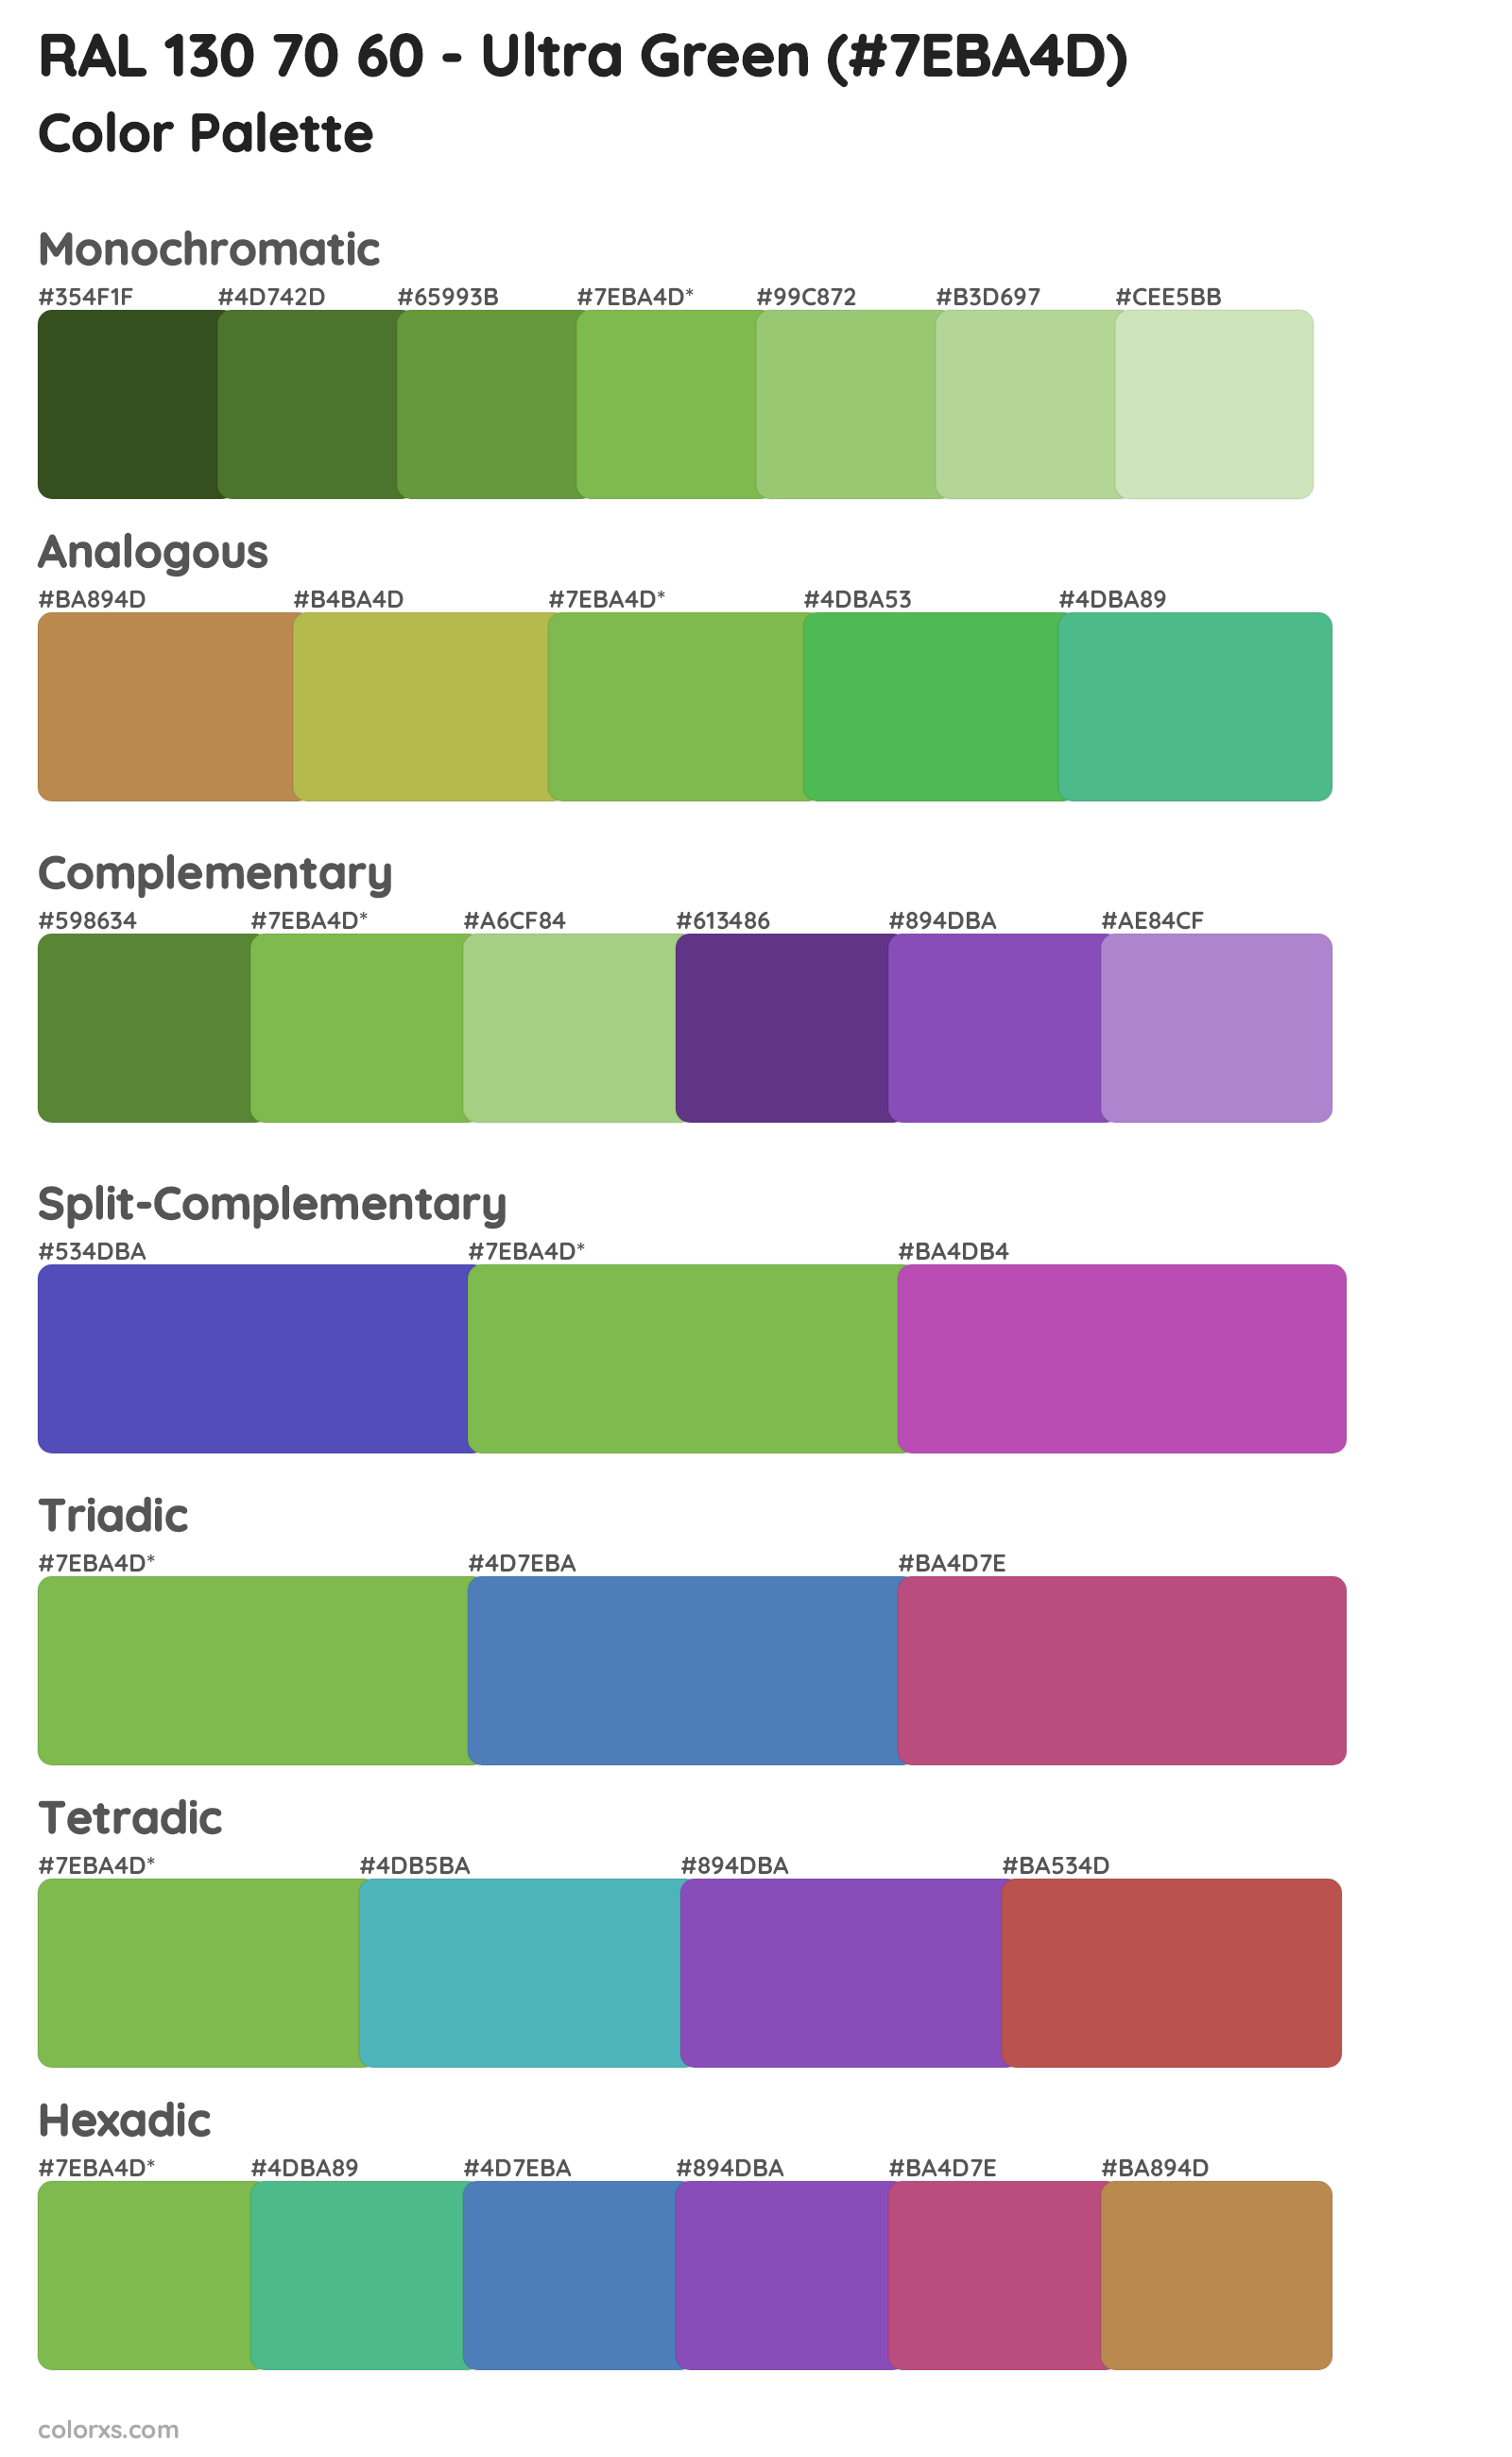 RAL 130 70 60 - Ultra Green Color Scheme Palettes